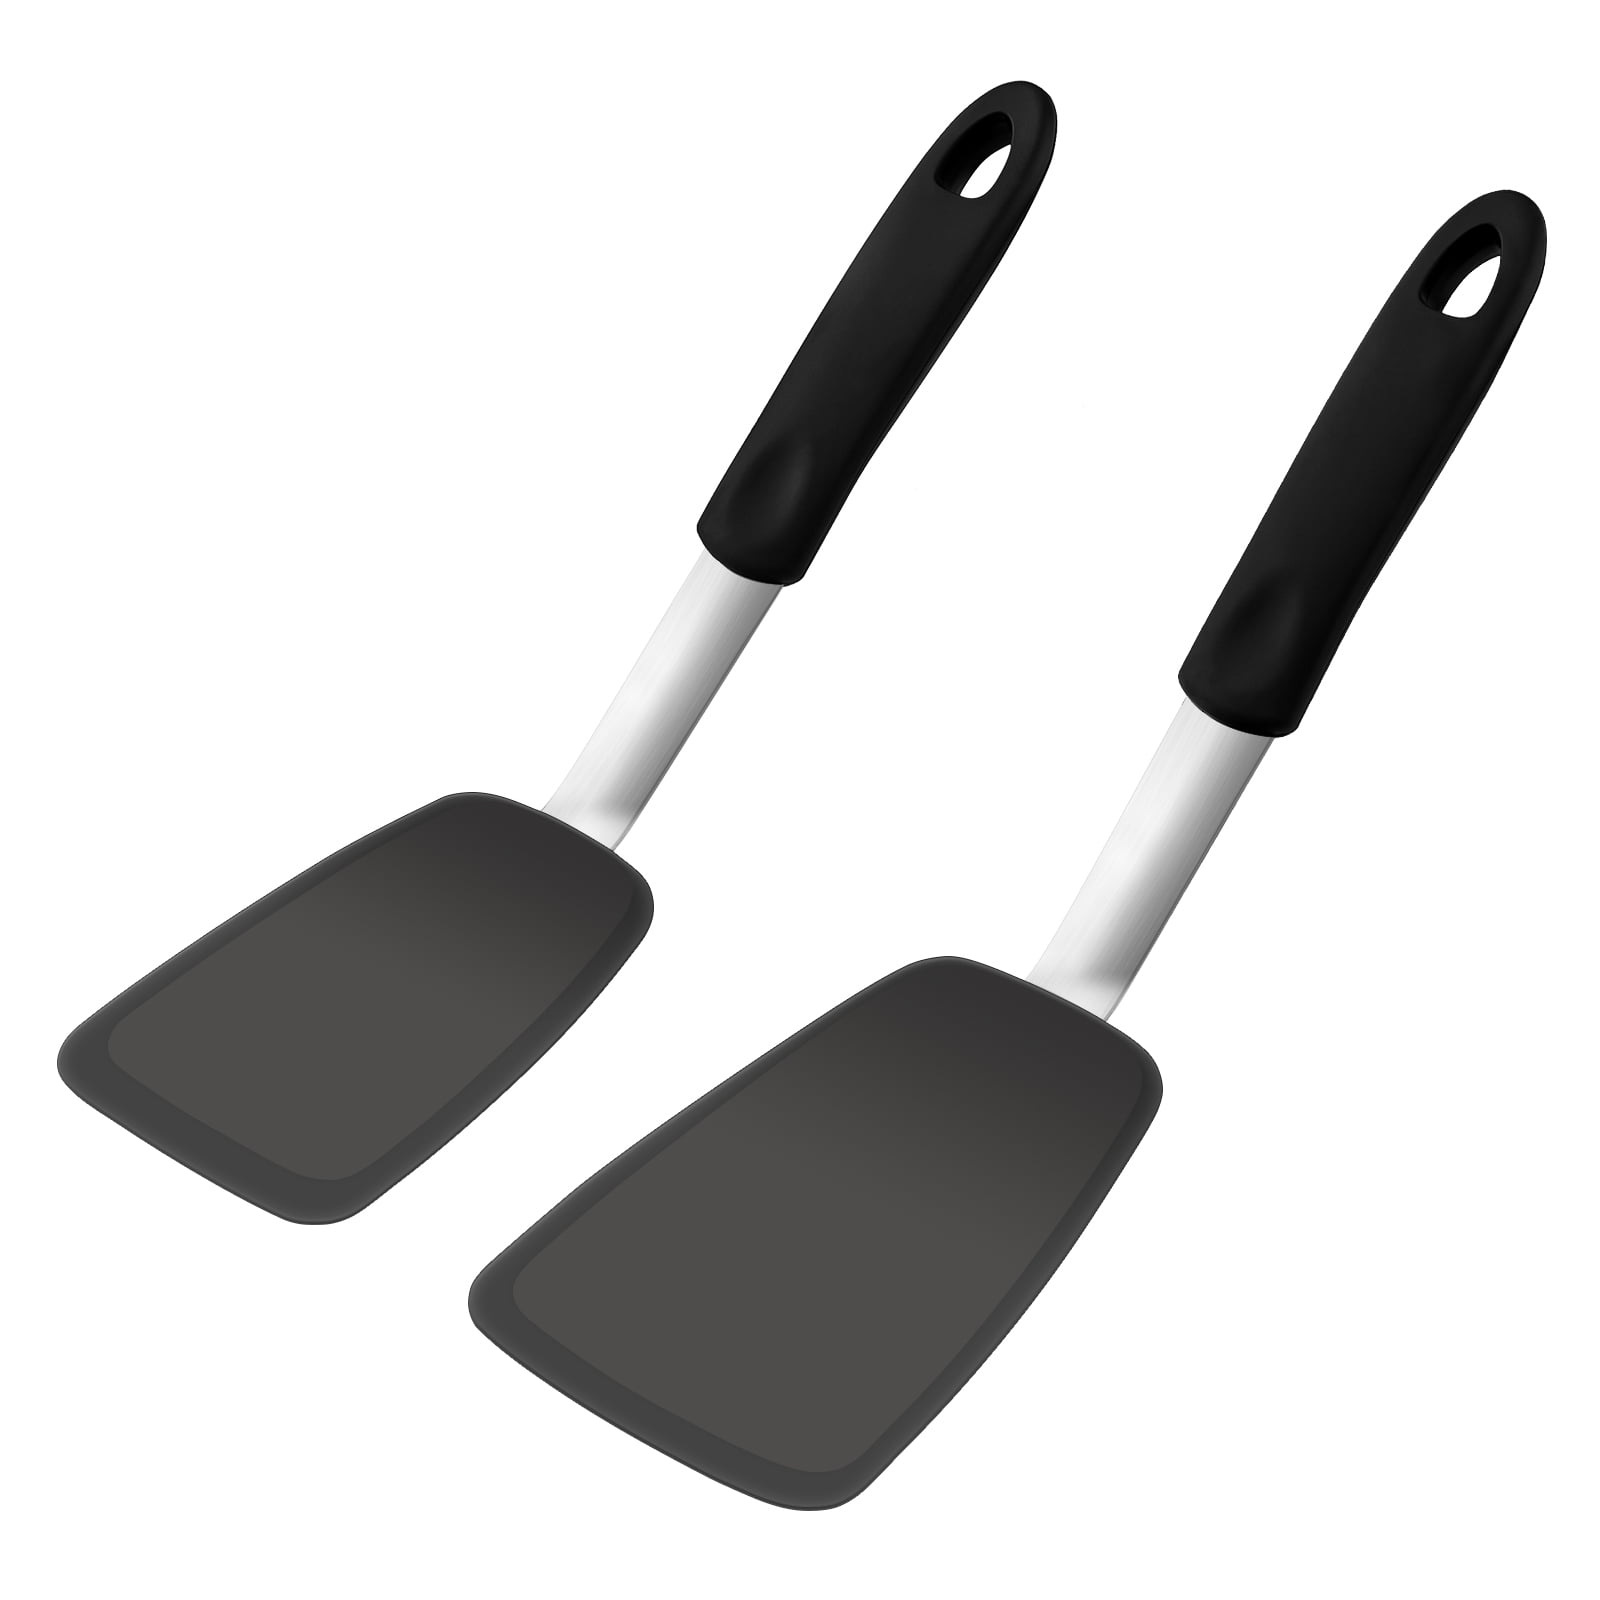 Unicook Flexible Spatula Turner 2 Pack for Nonstick Cookware, Heat  Resistant Silicone Spatulas, Kitchen Utensils for baking, flipping eggs,  Burgers